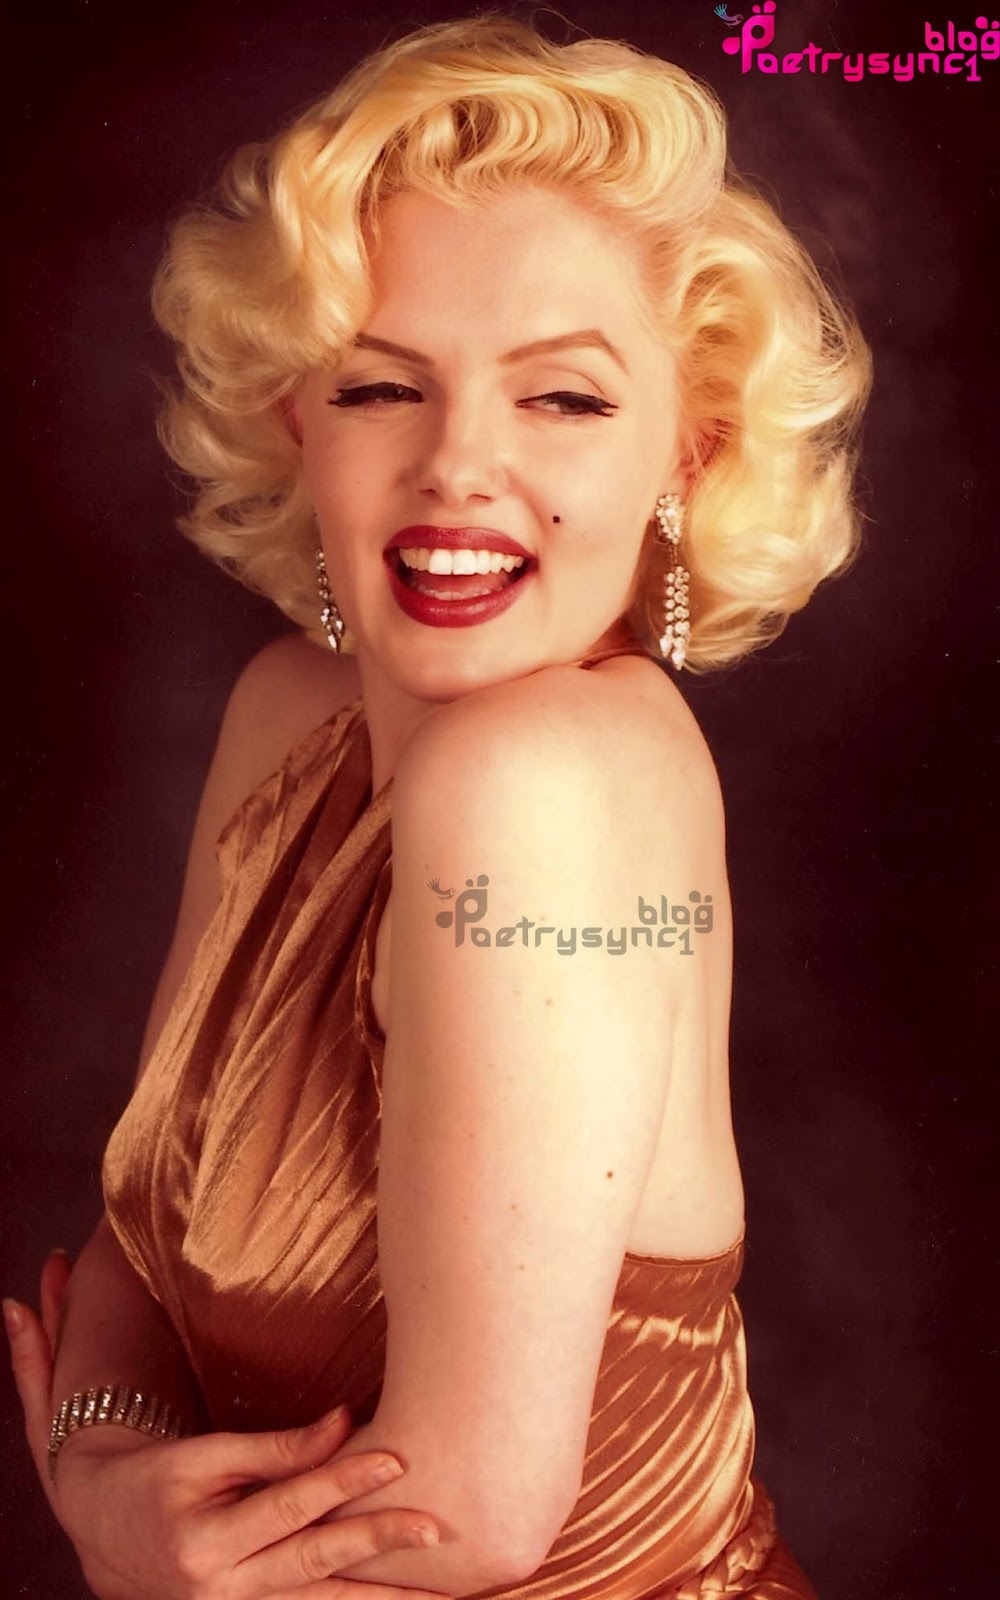 Marilyn Monroe Image With Her Information Of "In Some Like It Hot (1959